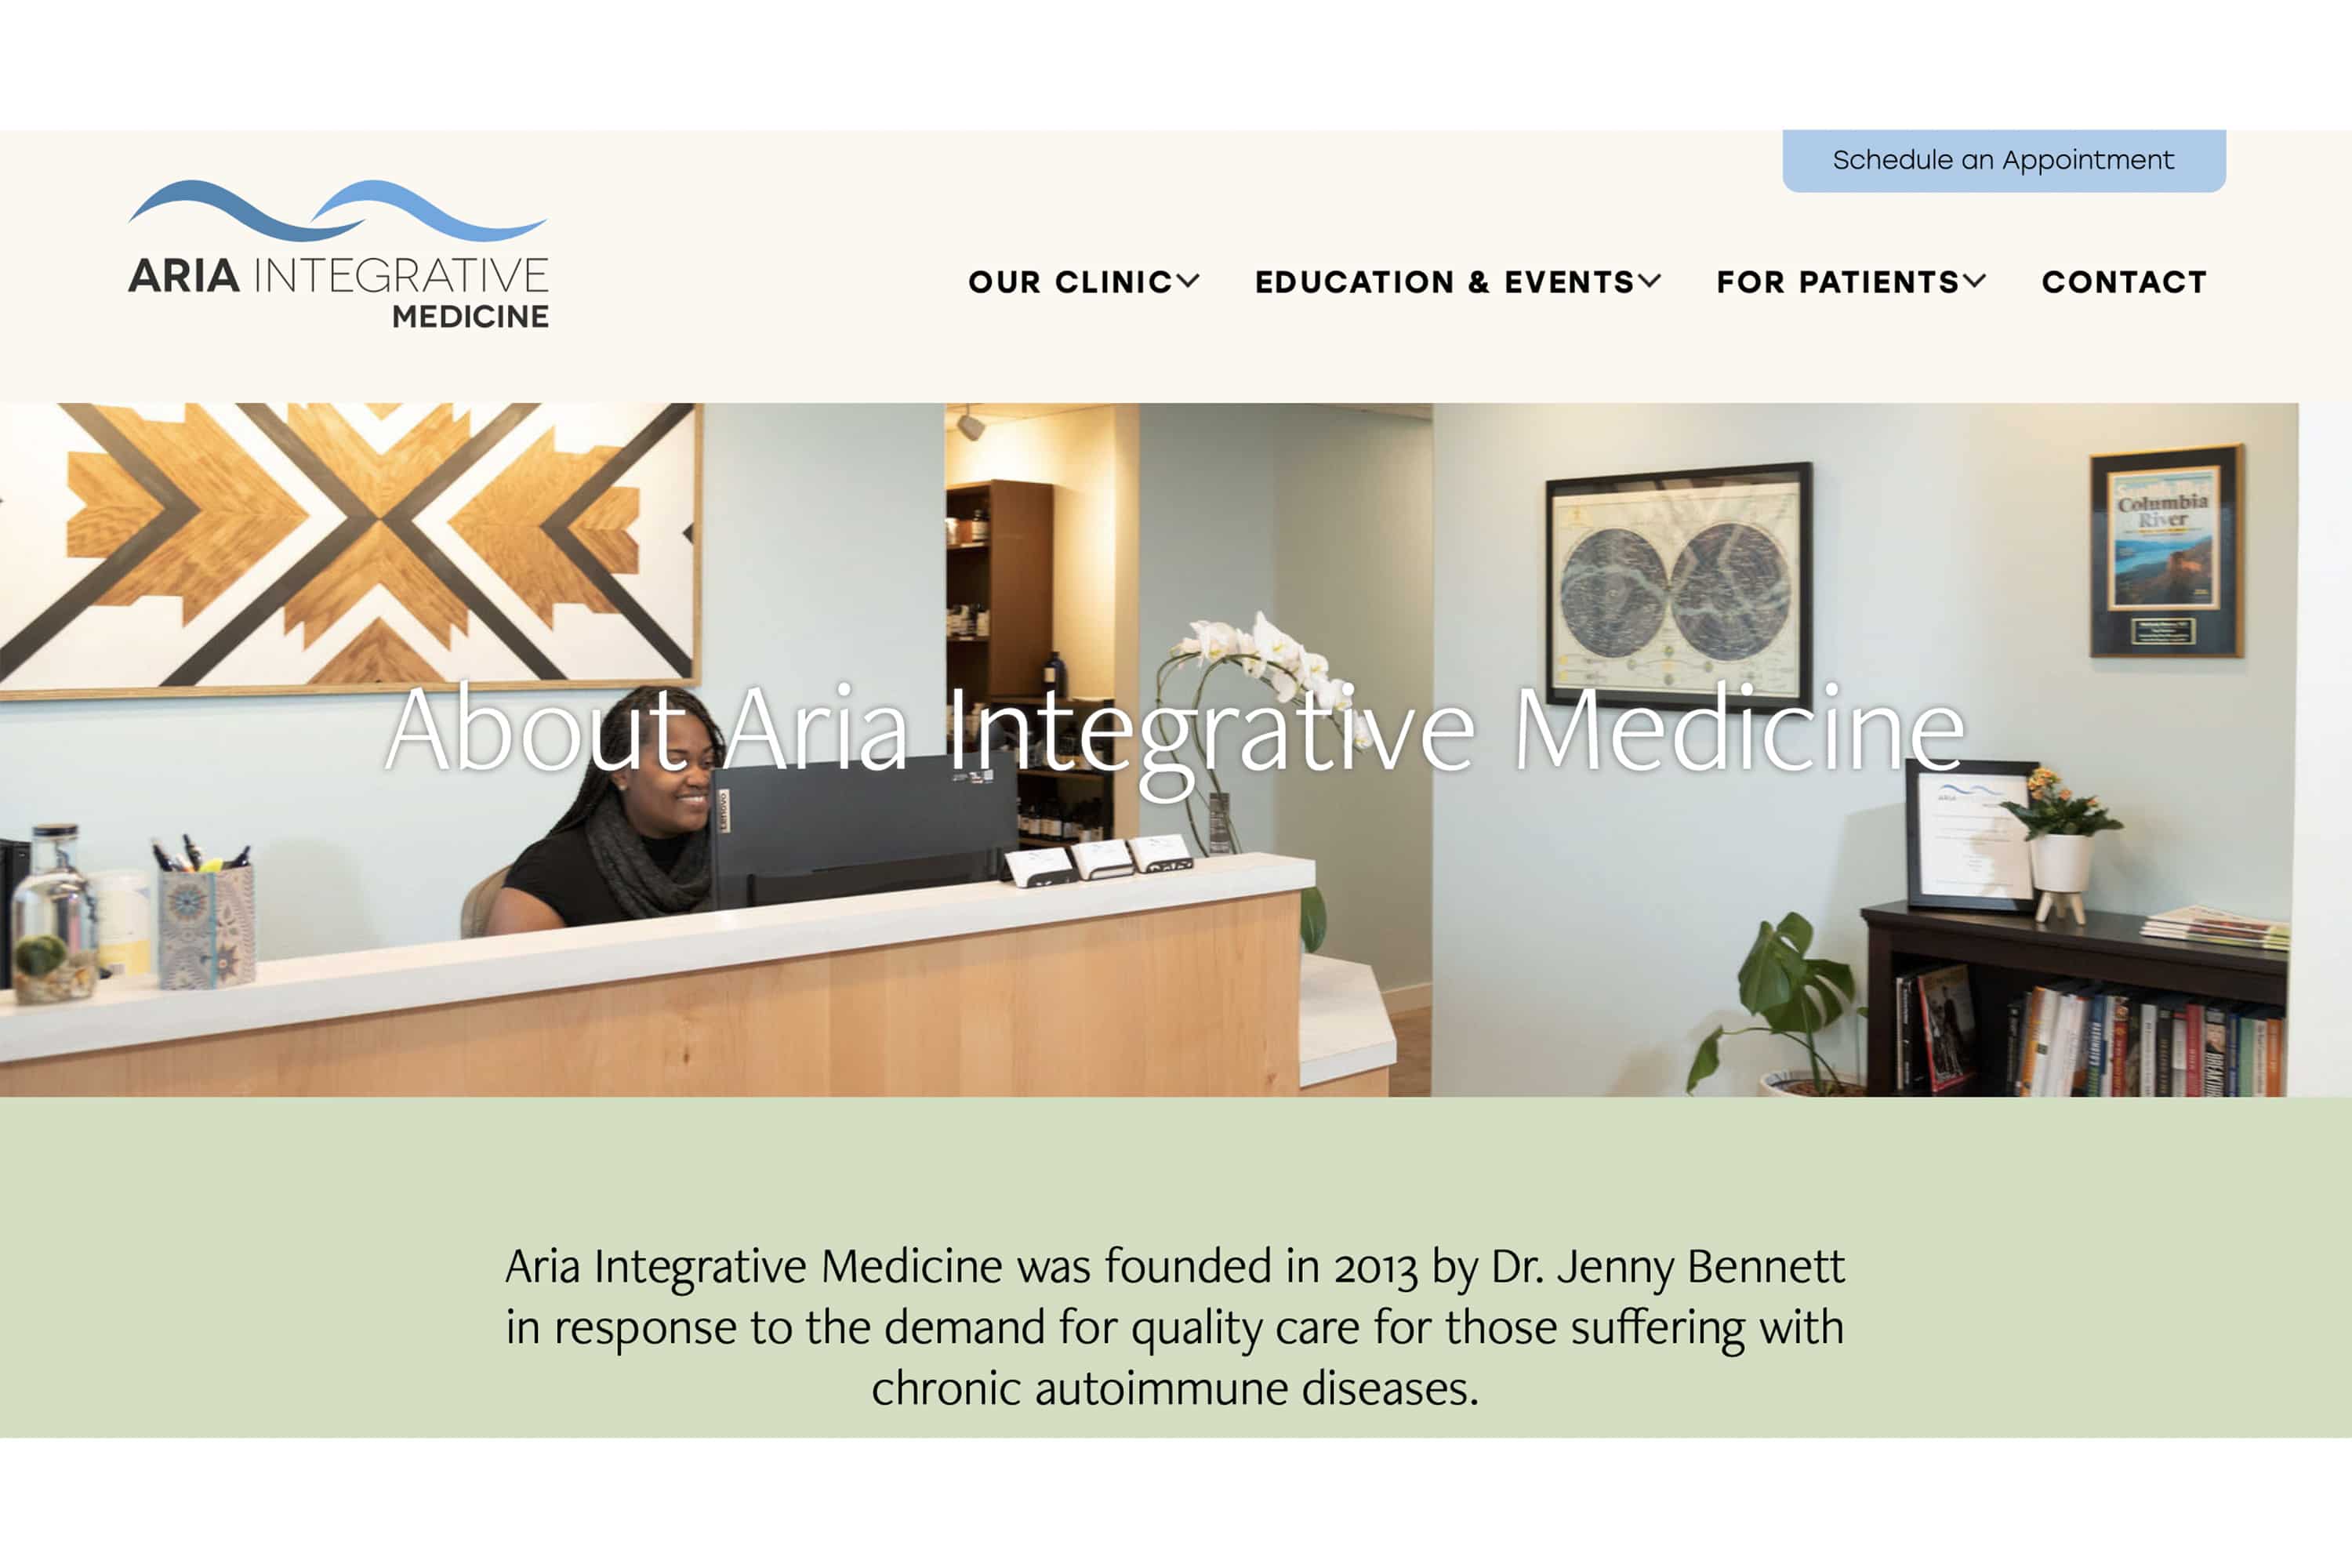 Photo of a women at reception desk being used on a professional medical website as a banner